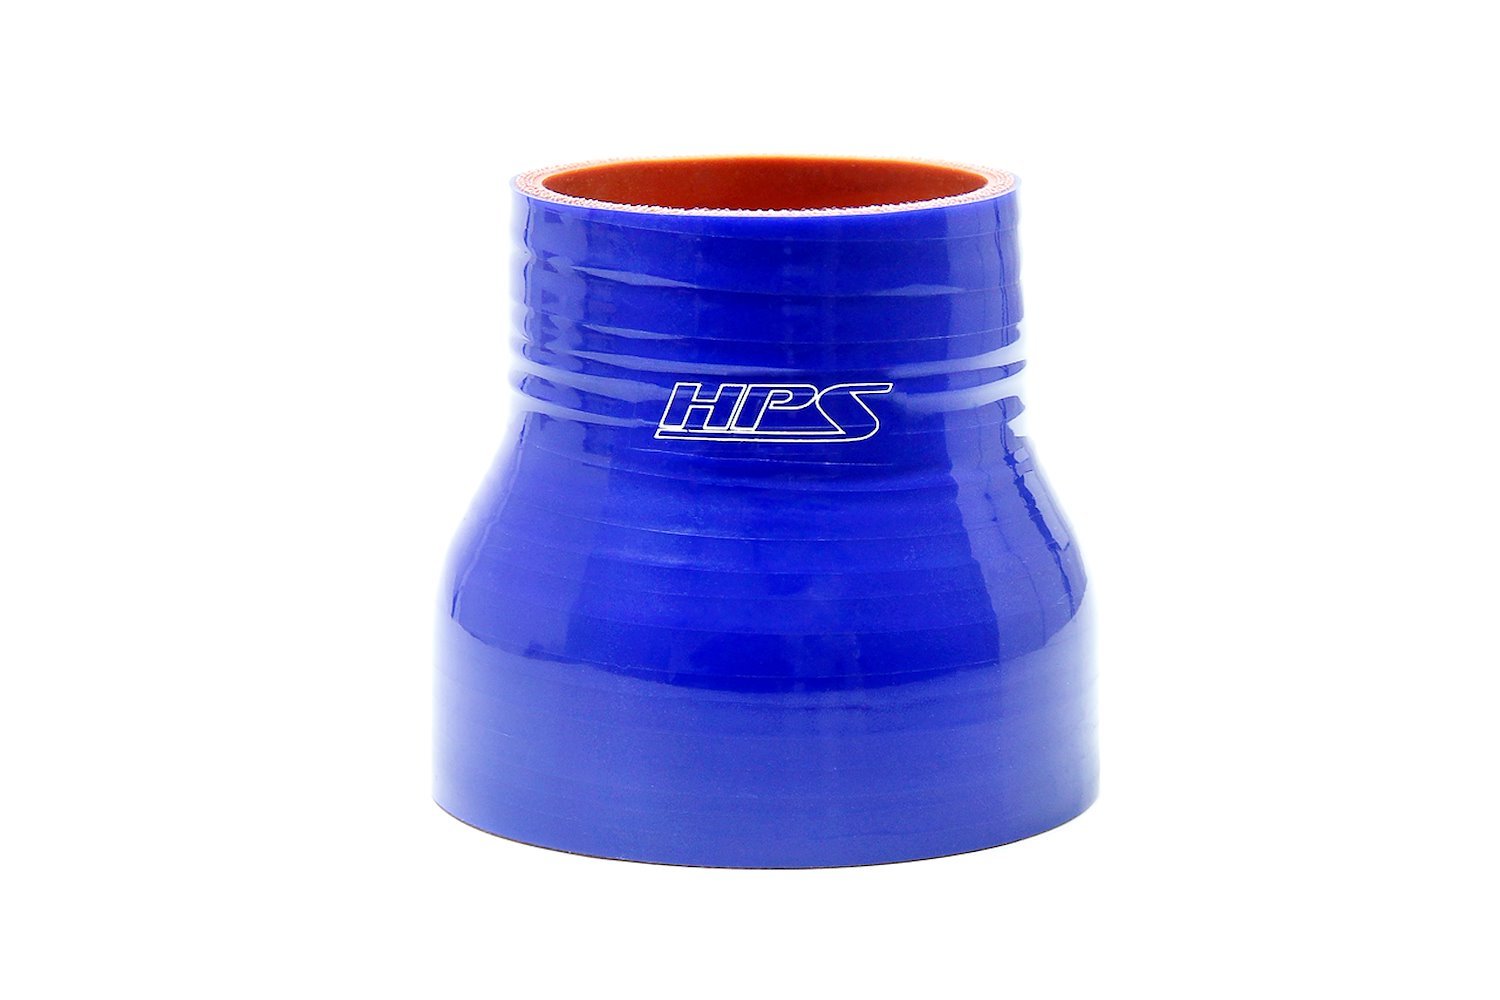 HTSR-250-275-BLUE Silicone Reducer Hose, High-Temp 4-Ply Reinforced, 2-1/2 in. - 2-3/4 in. ID, 3 in. Long, Blue